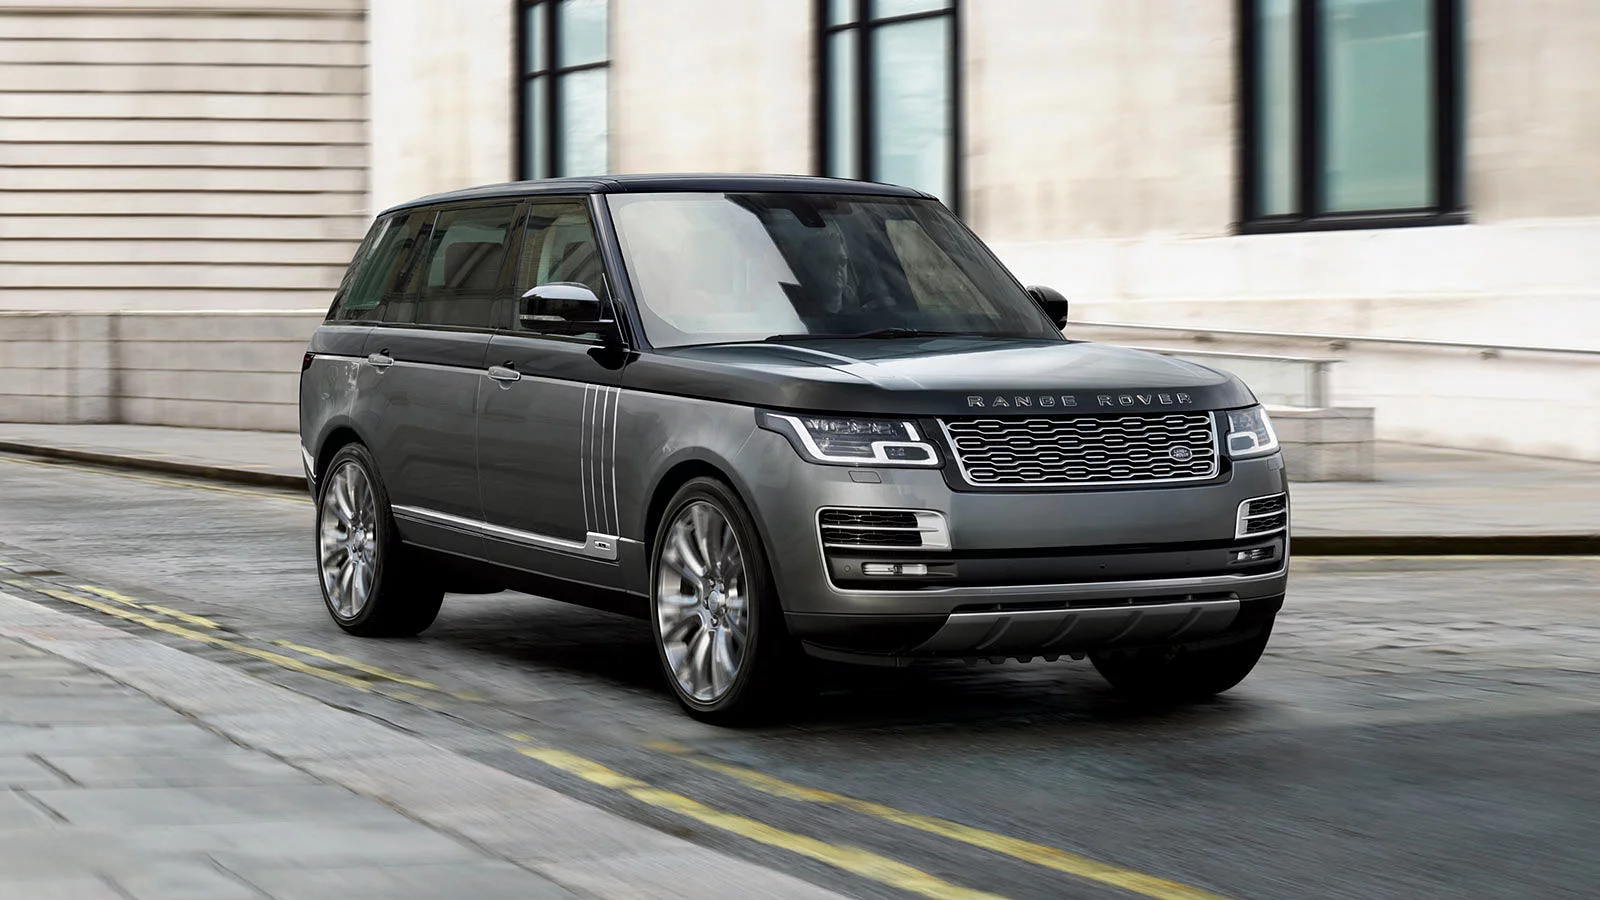 RANGE ROVER <textsmall style="text-transform: none;">SVAutobiography</textsmall> DYNAMIC